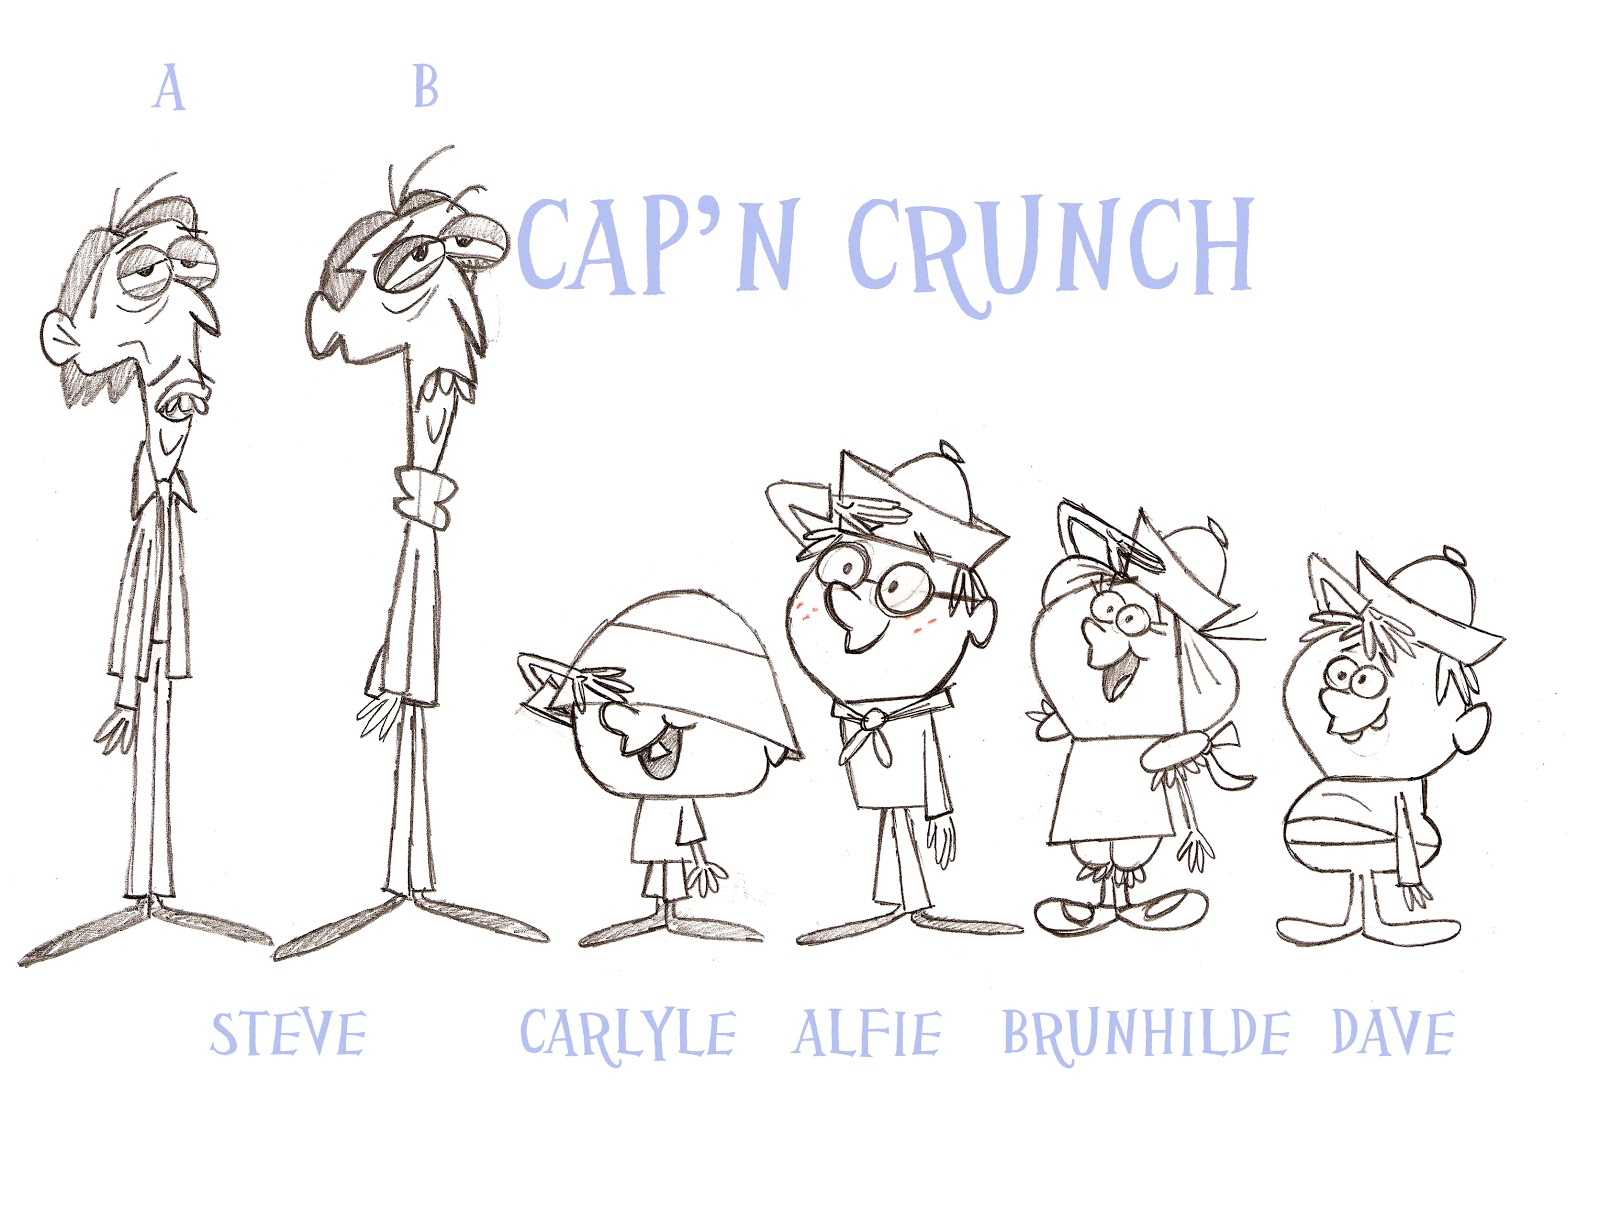 Some concept designs for a Cap'n Crunch commercial I had just complete...